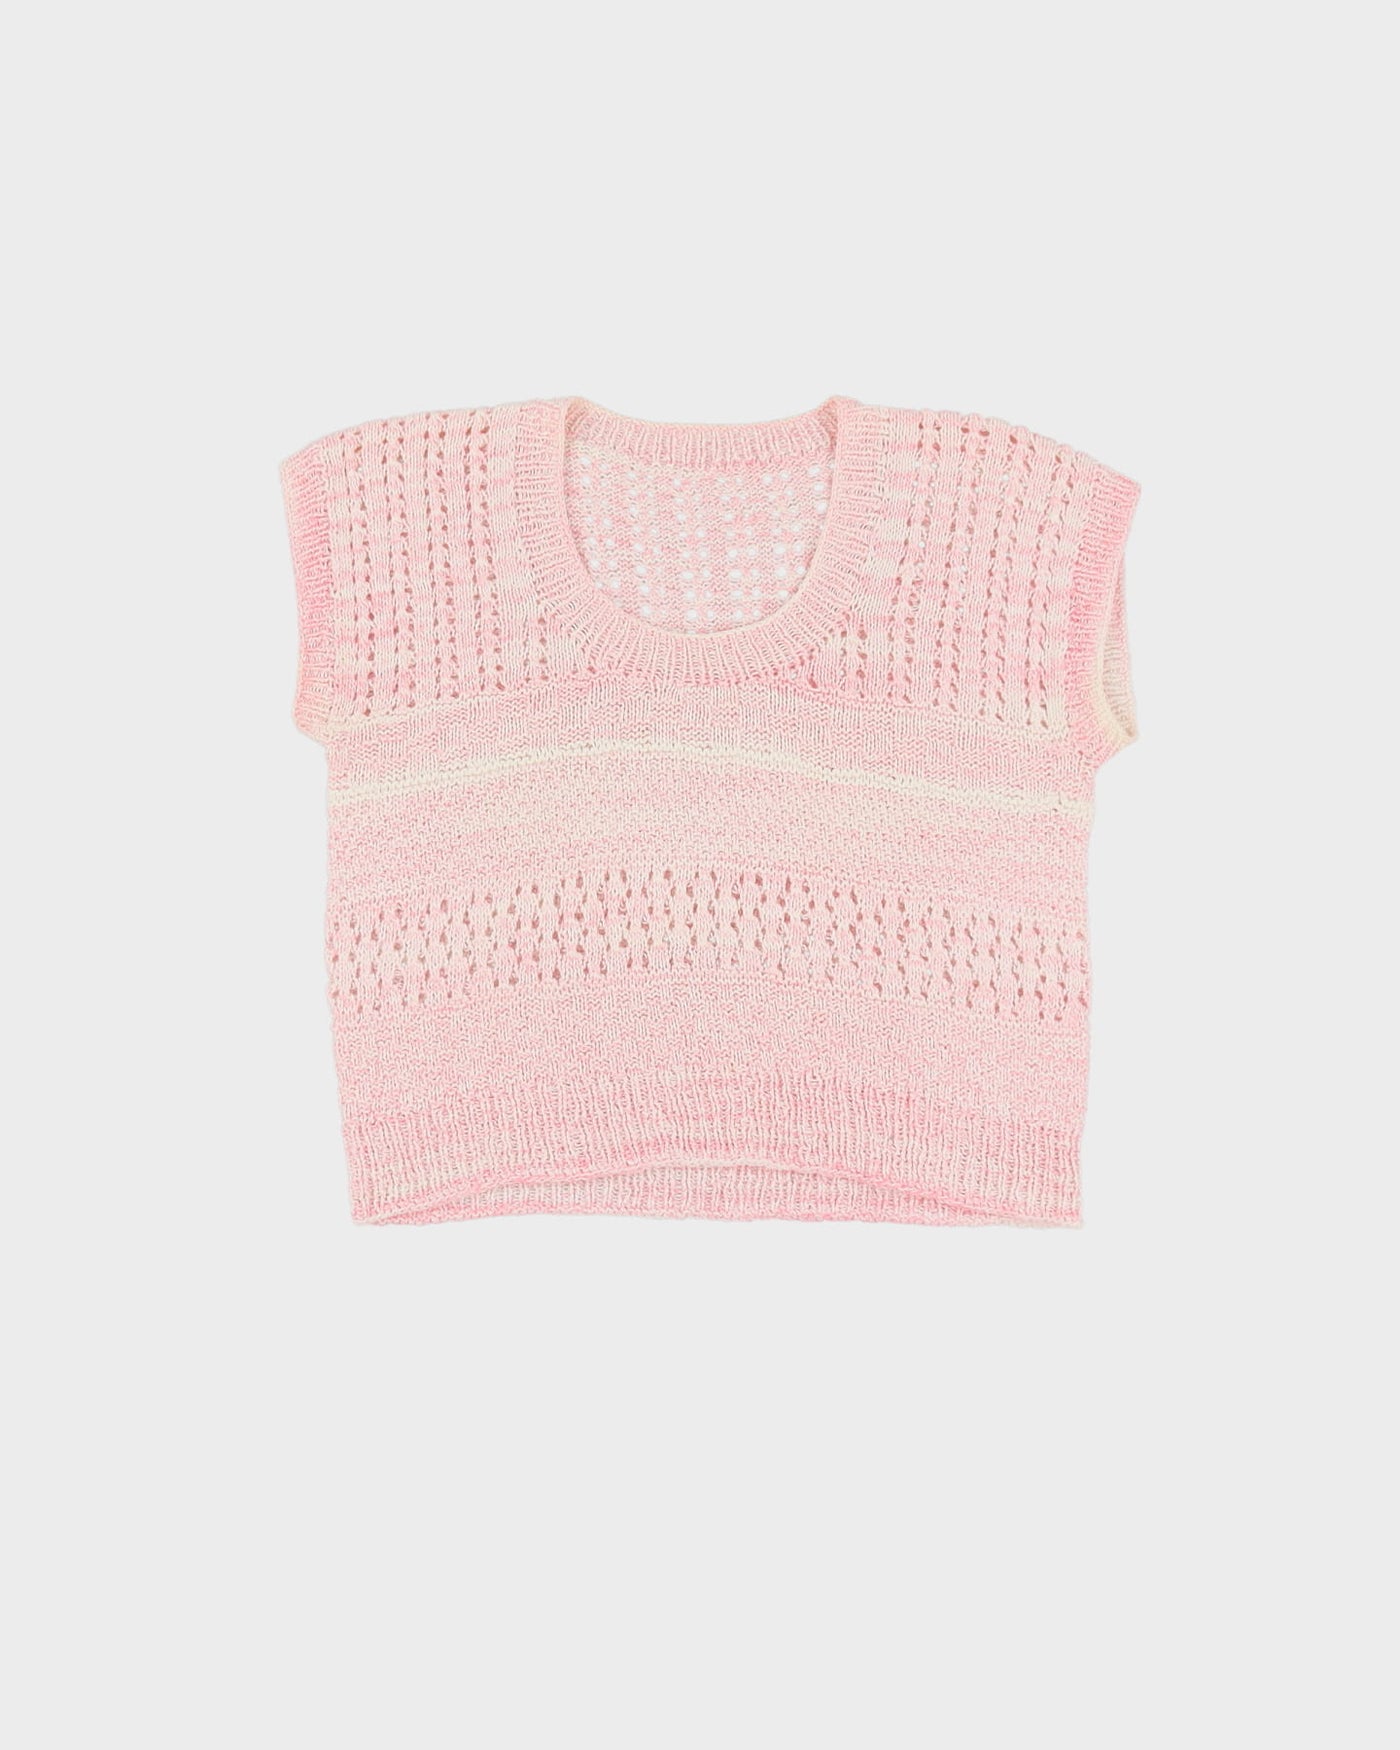 Vintage 1980s Pink Knitted Short Sleeve Top - S / M